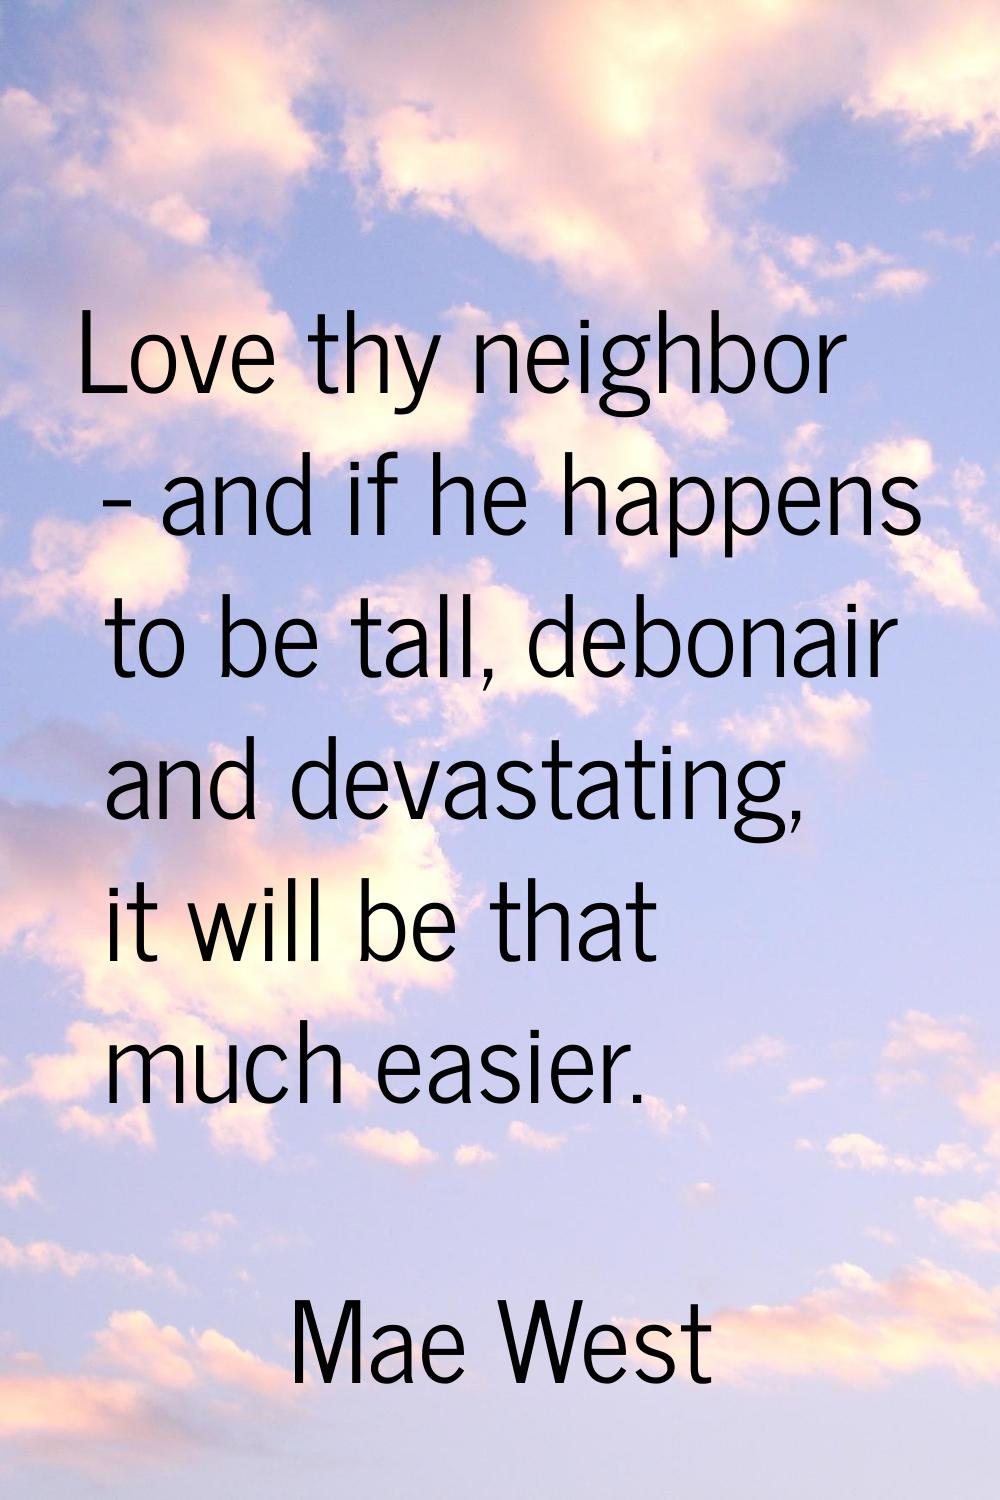 Love thy neighbor - and if he happens to be tall, debonair and devastating, it will be that much ea